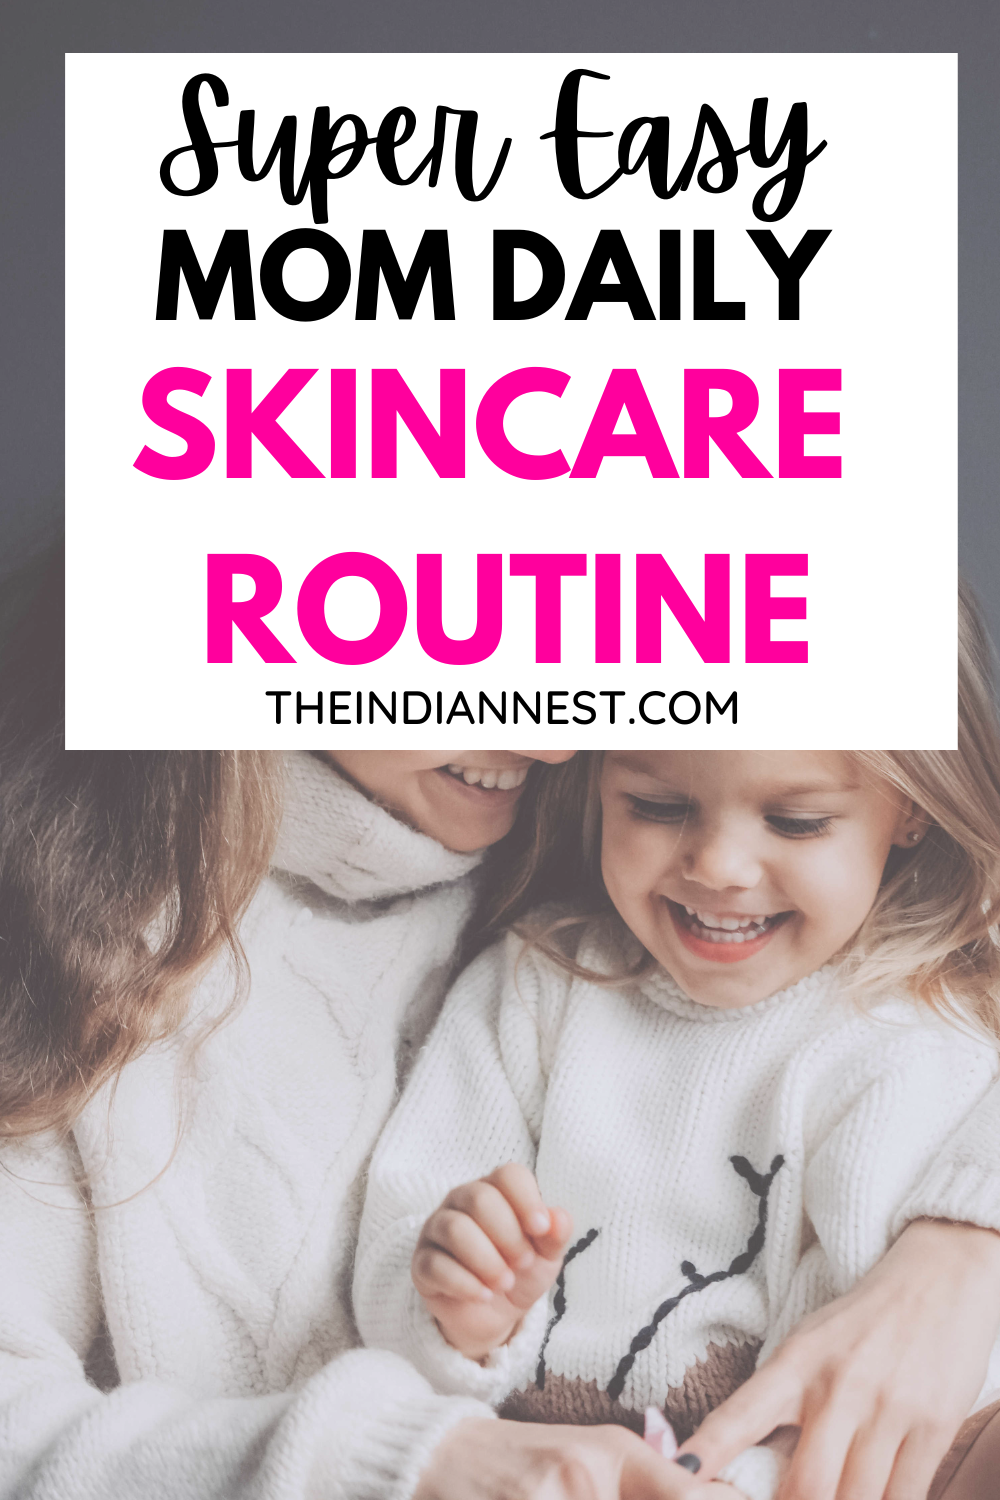 Skincare Routine For Busy Moms-Super Easy Steps